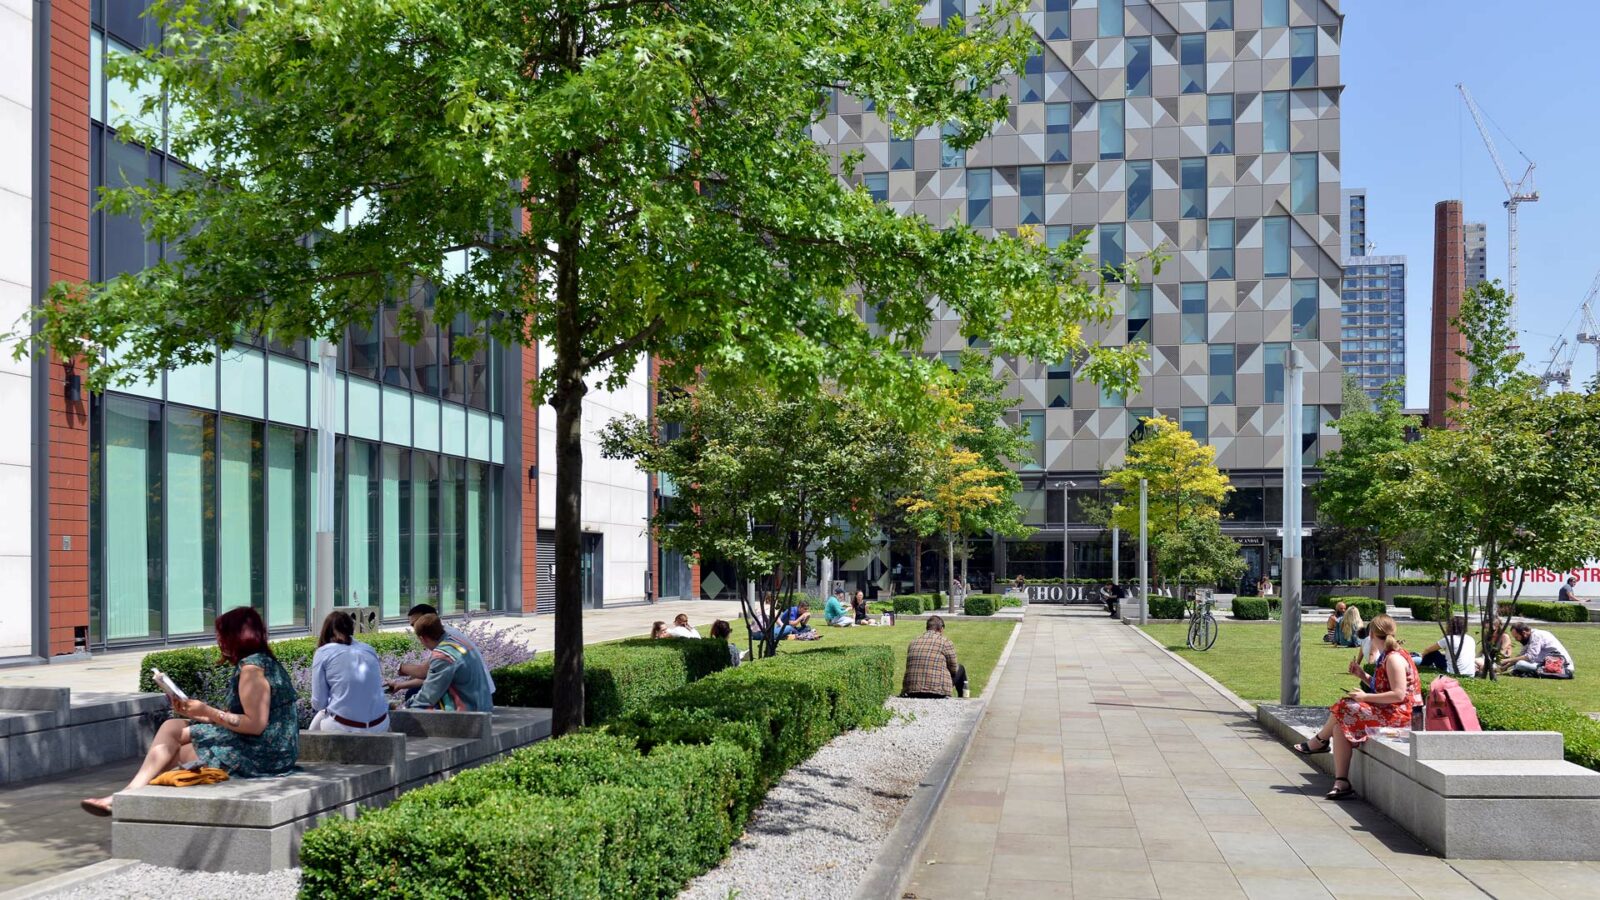 Lush planting and plentiful seating in James Grigor Square